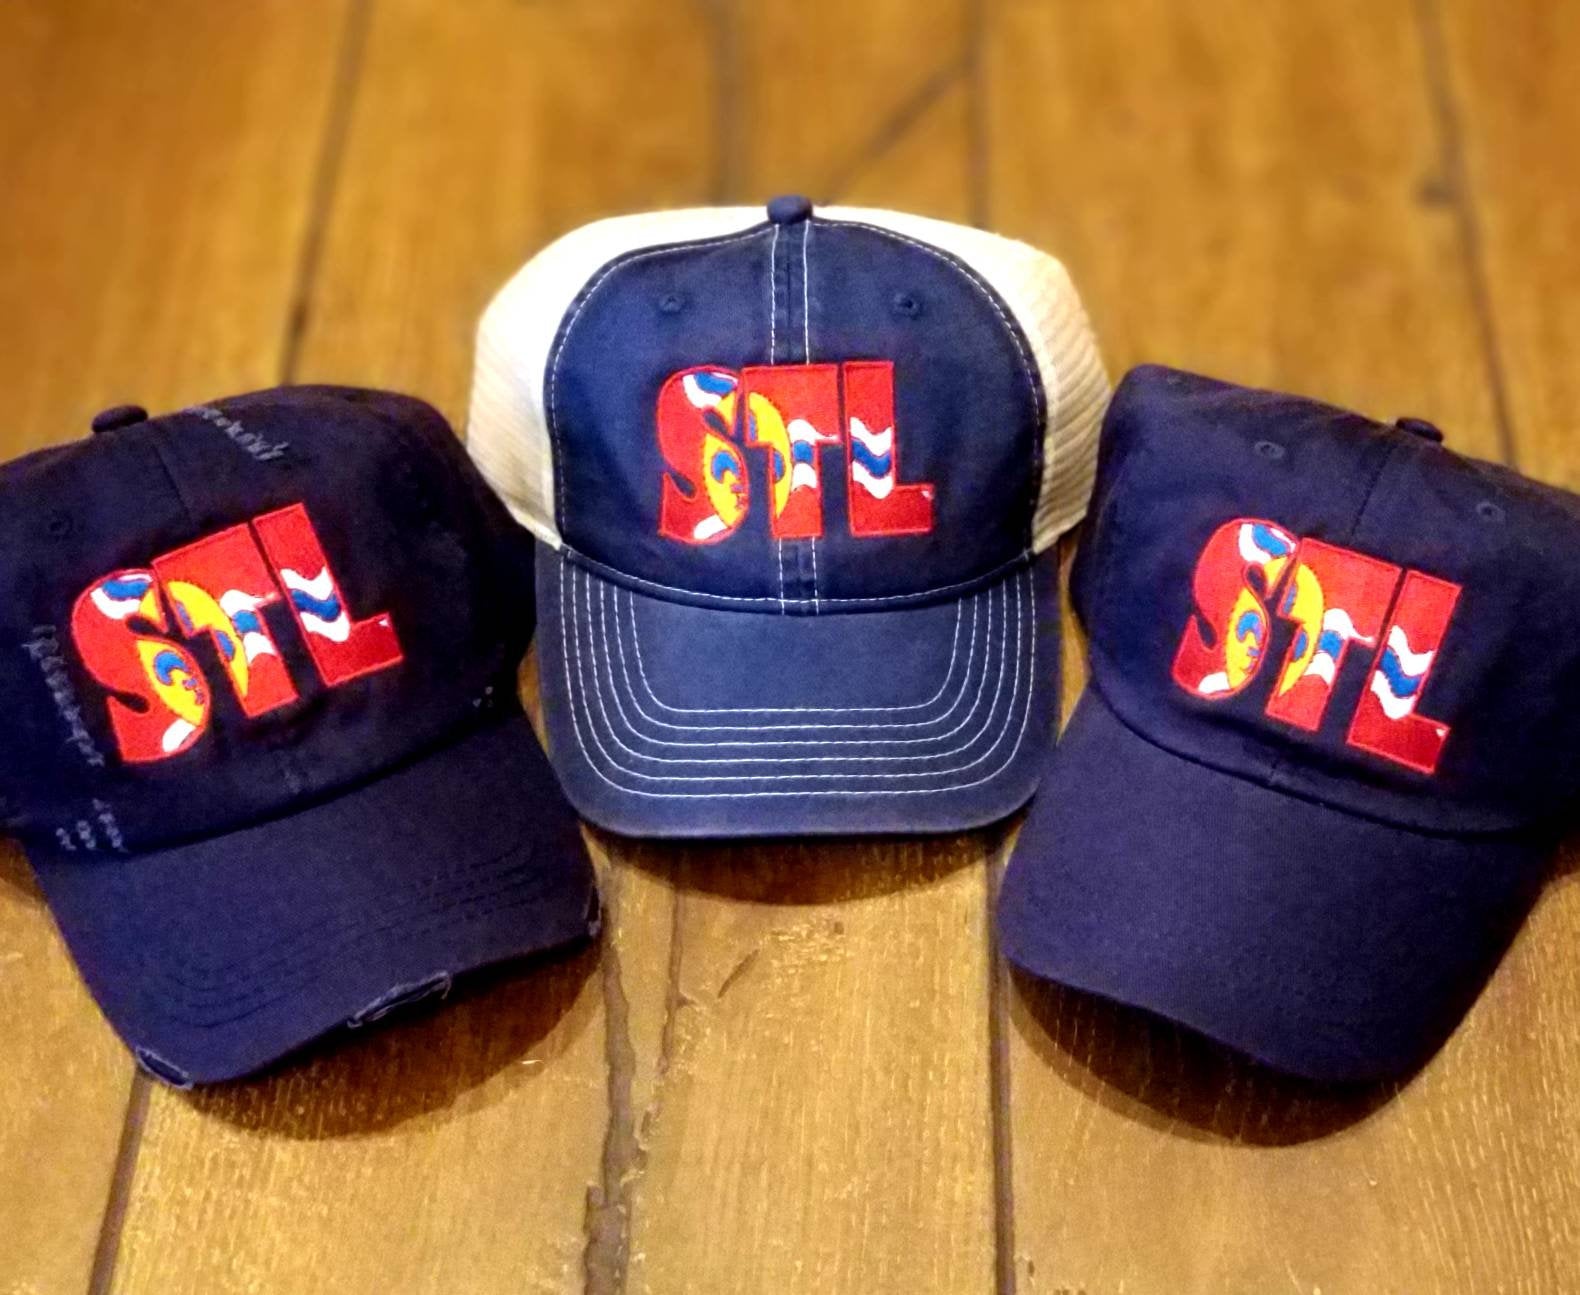 STL Hat - Embroidered St. Louis City Flag Airport Code Hat, Saint Louis, Gateway City, The LOU, Cardinals, Custom Baseball and Trucker Hats